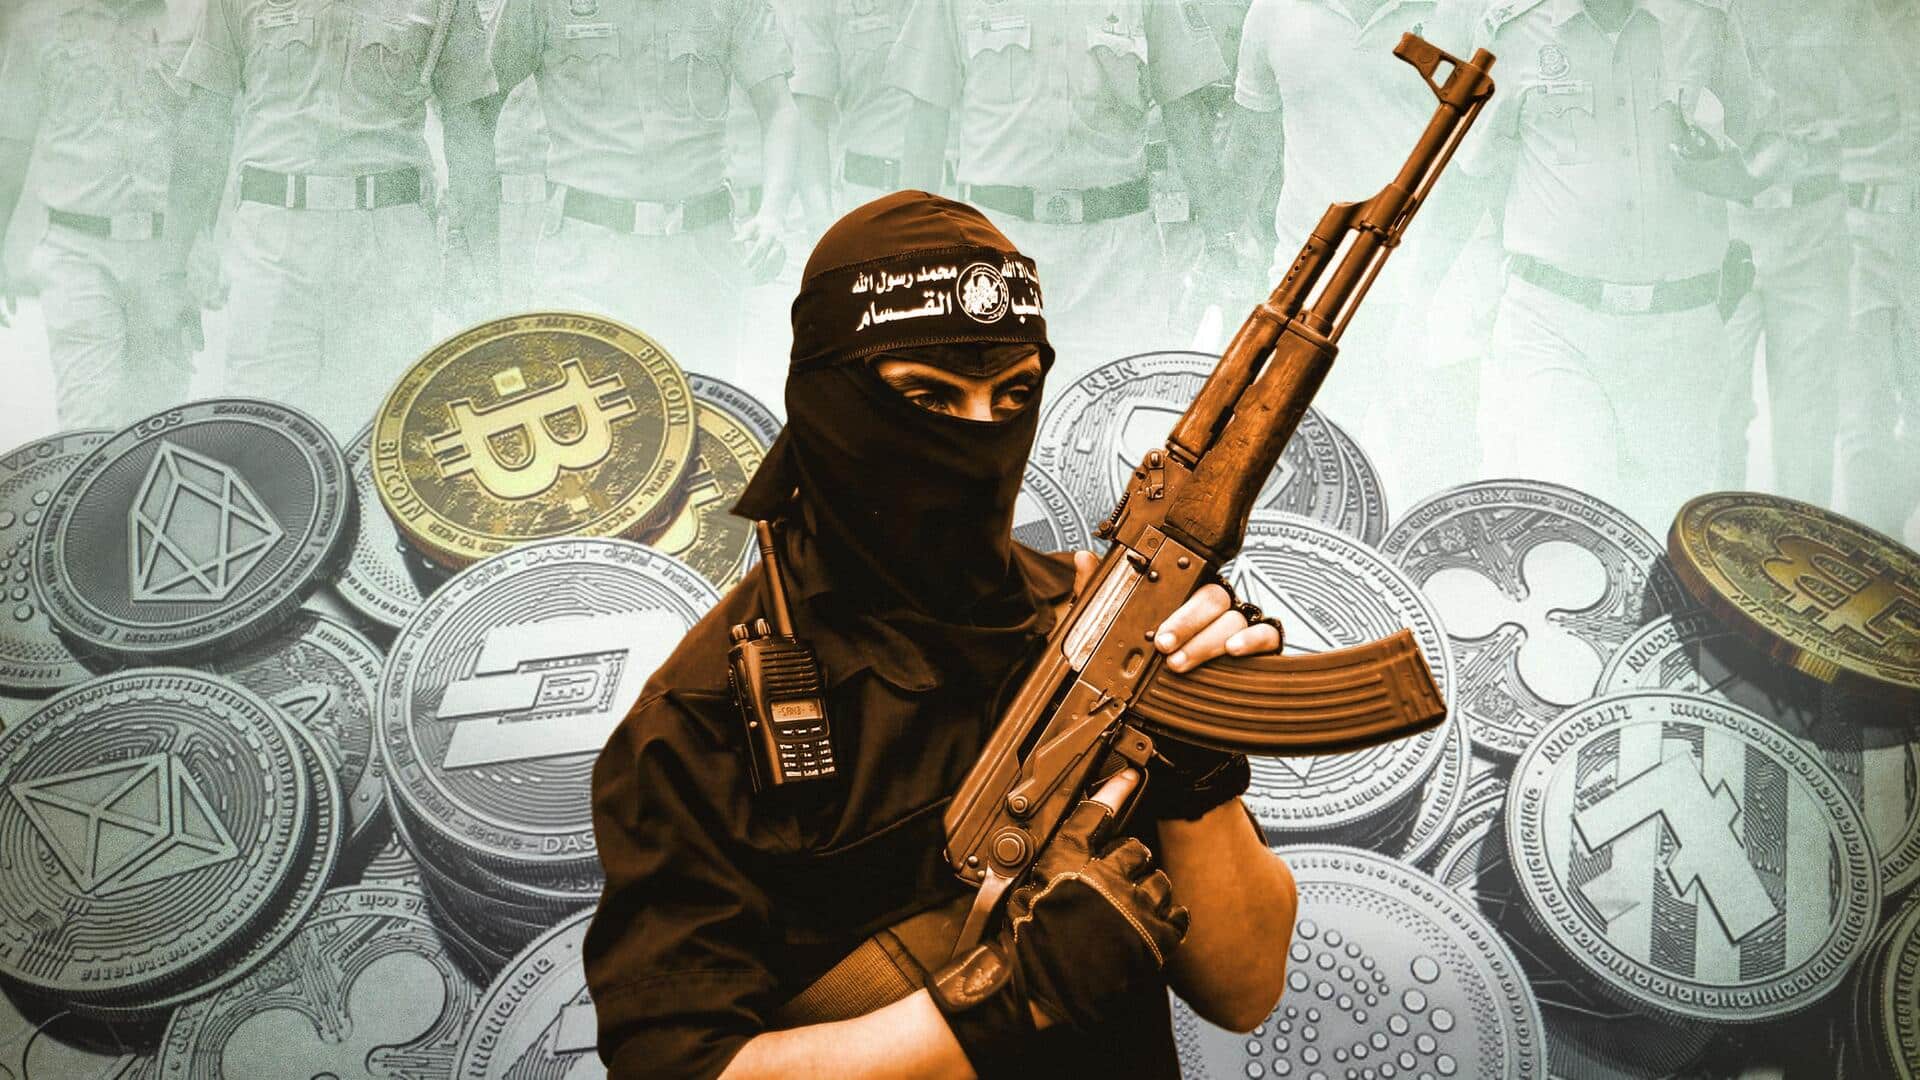 Hamas terrorist group's funding trail has Indian connection: Details here